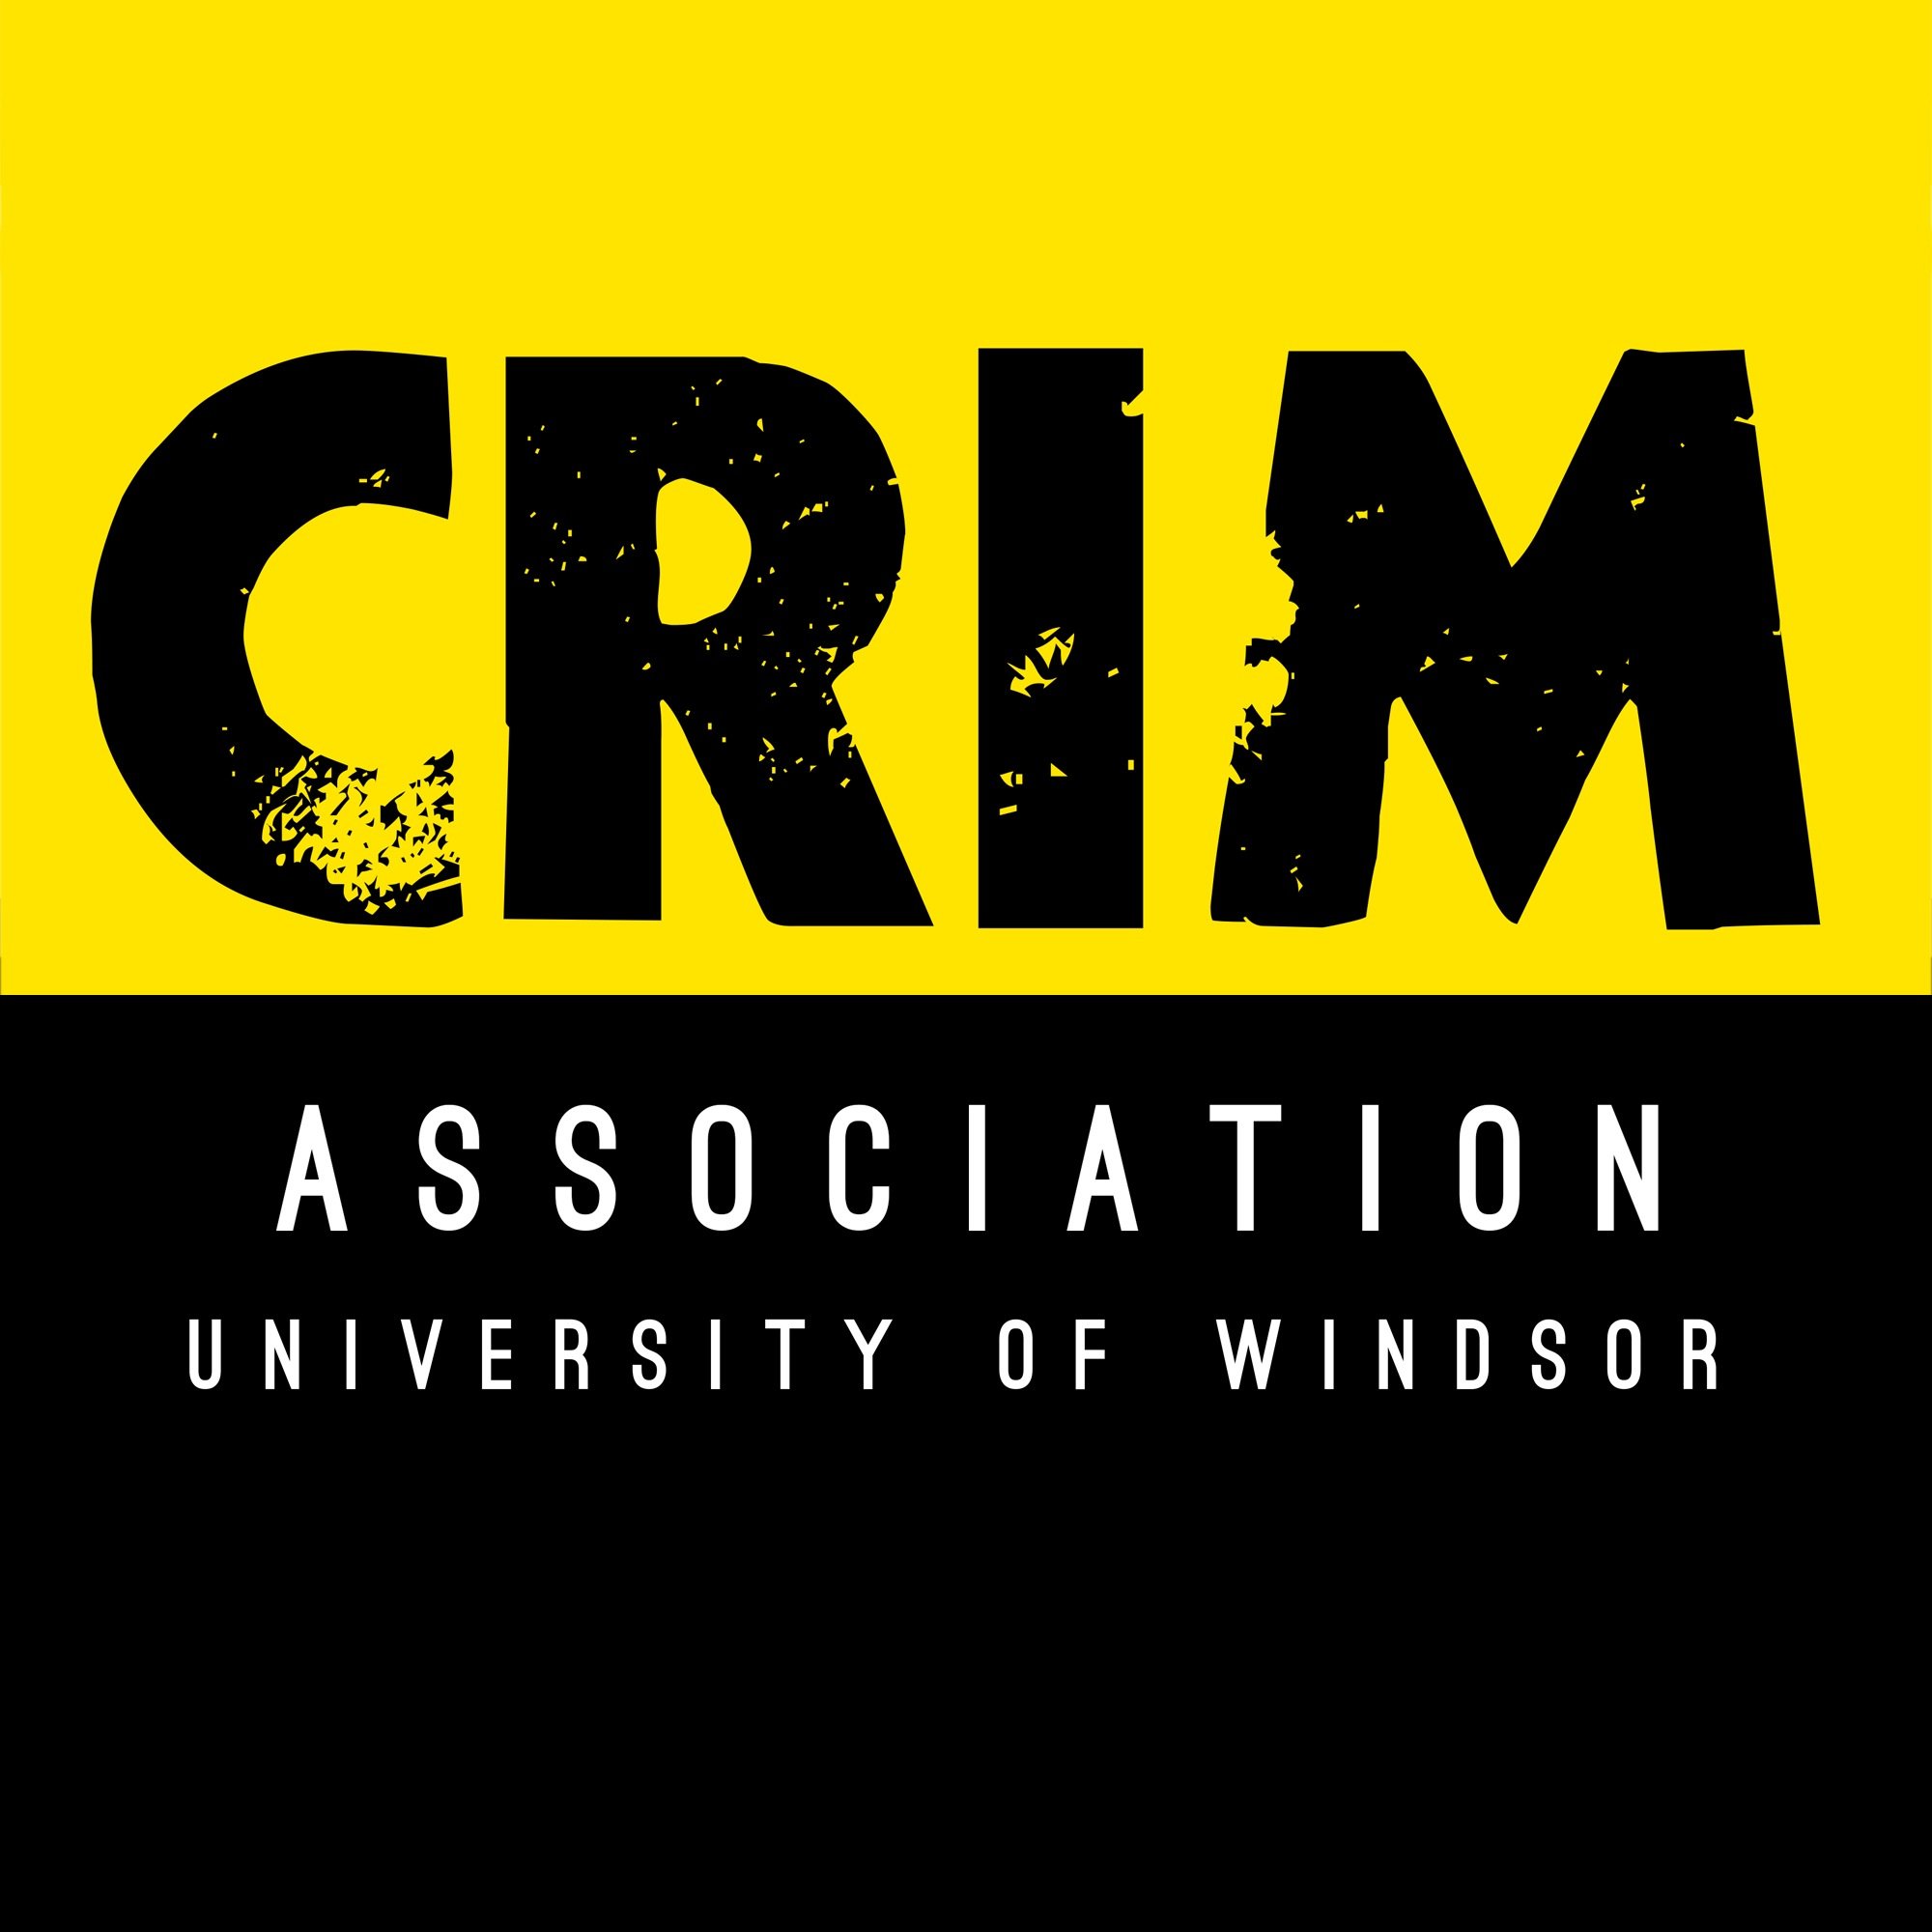 Keep up to date and in touch with the Criminology Association! Contact us at: criminology.windsor@gmail.com | Account managed by @howlettlarissa